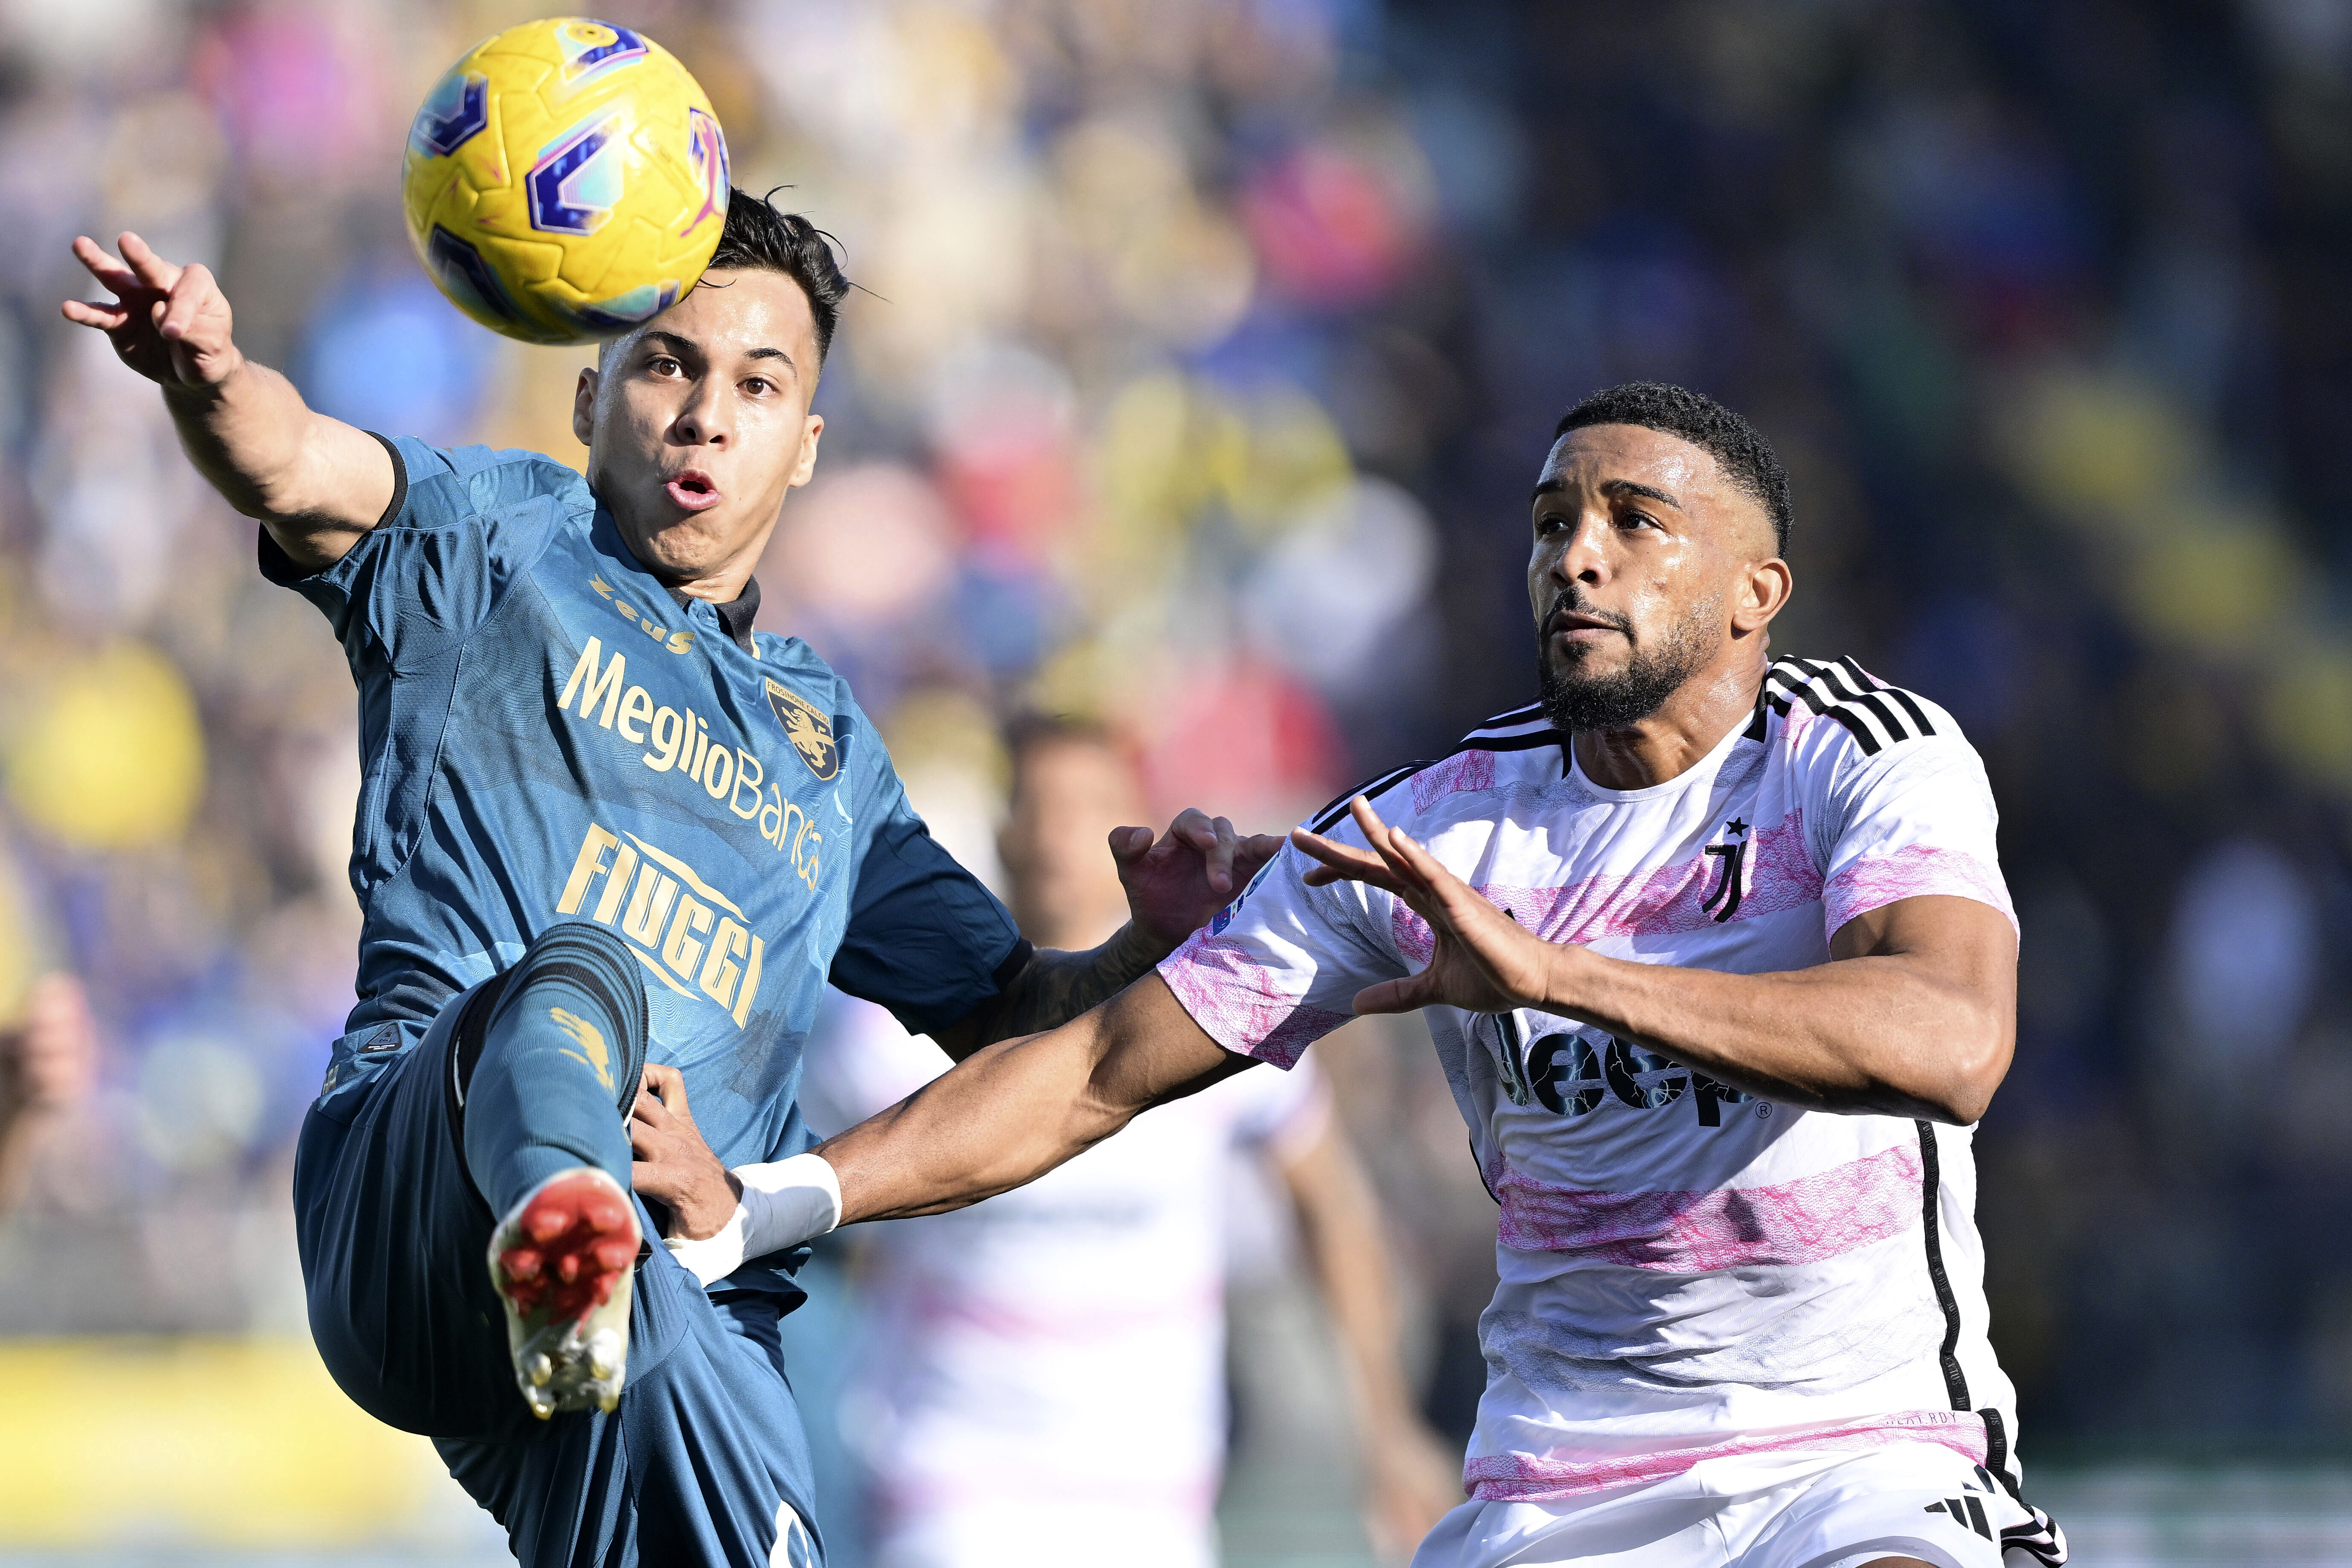 Frosinone’s Kaio Jorge, left, and Juventus’ Bremer battle for the ball